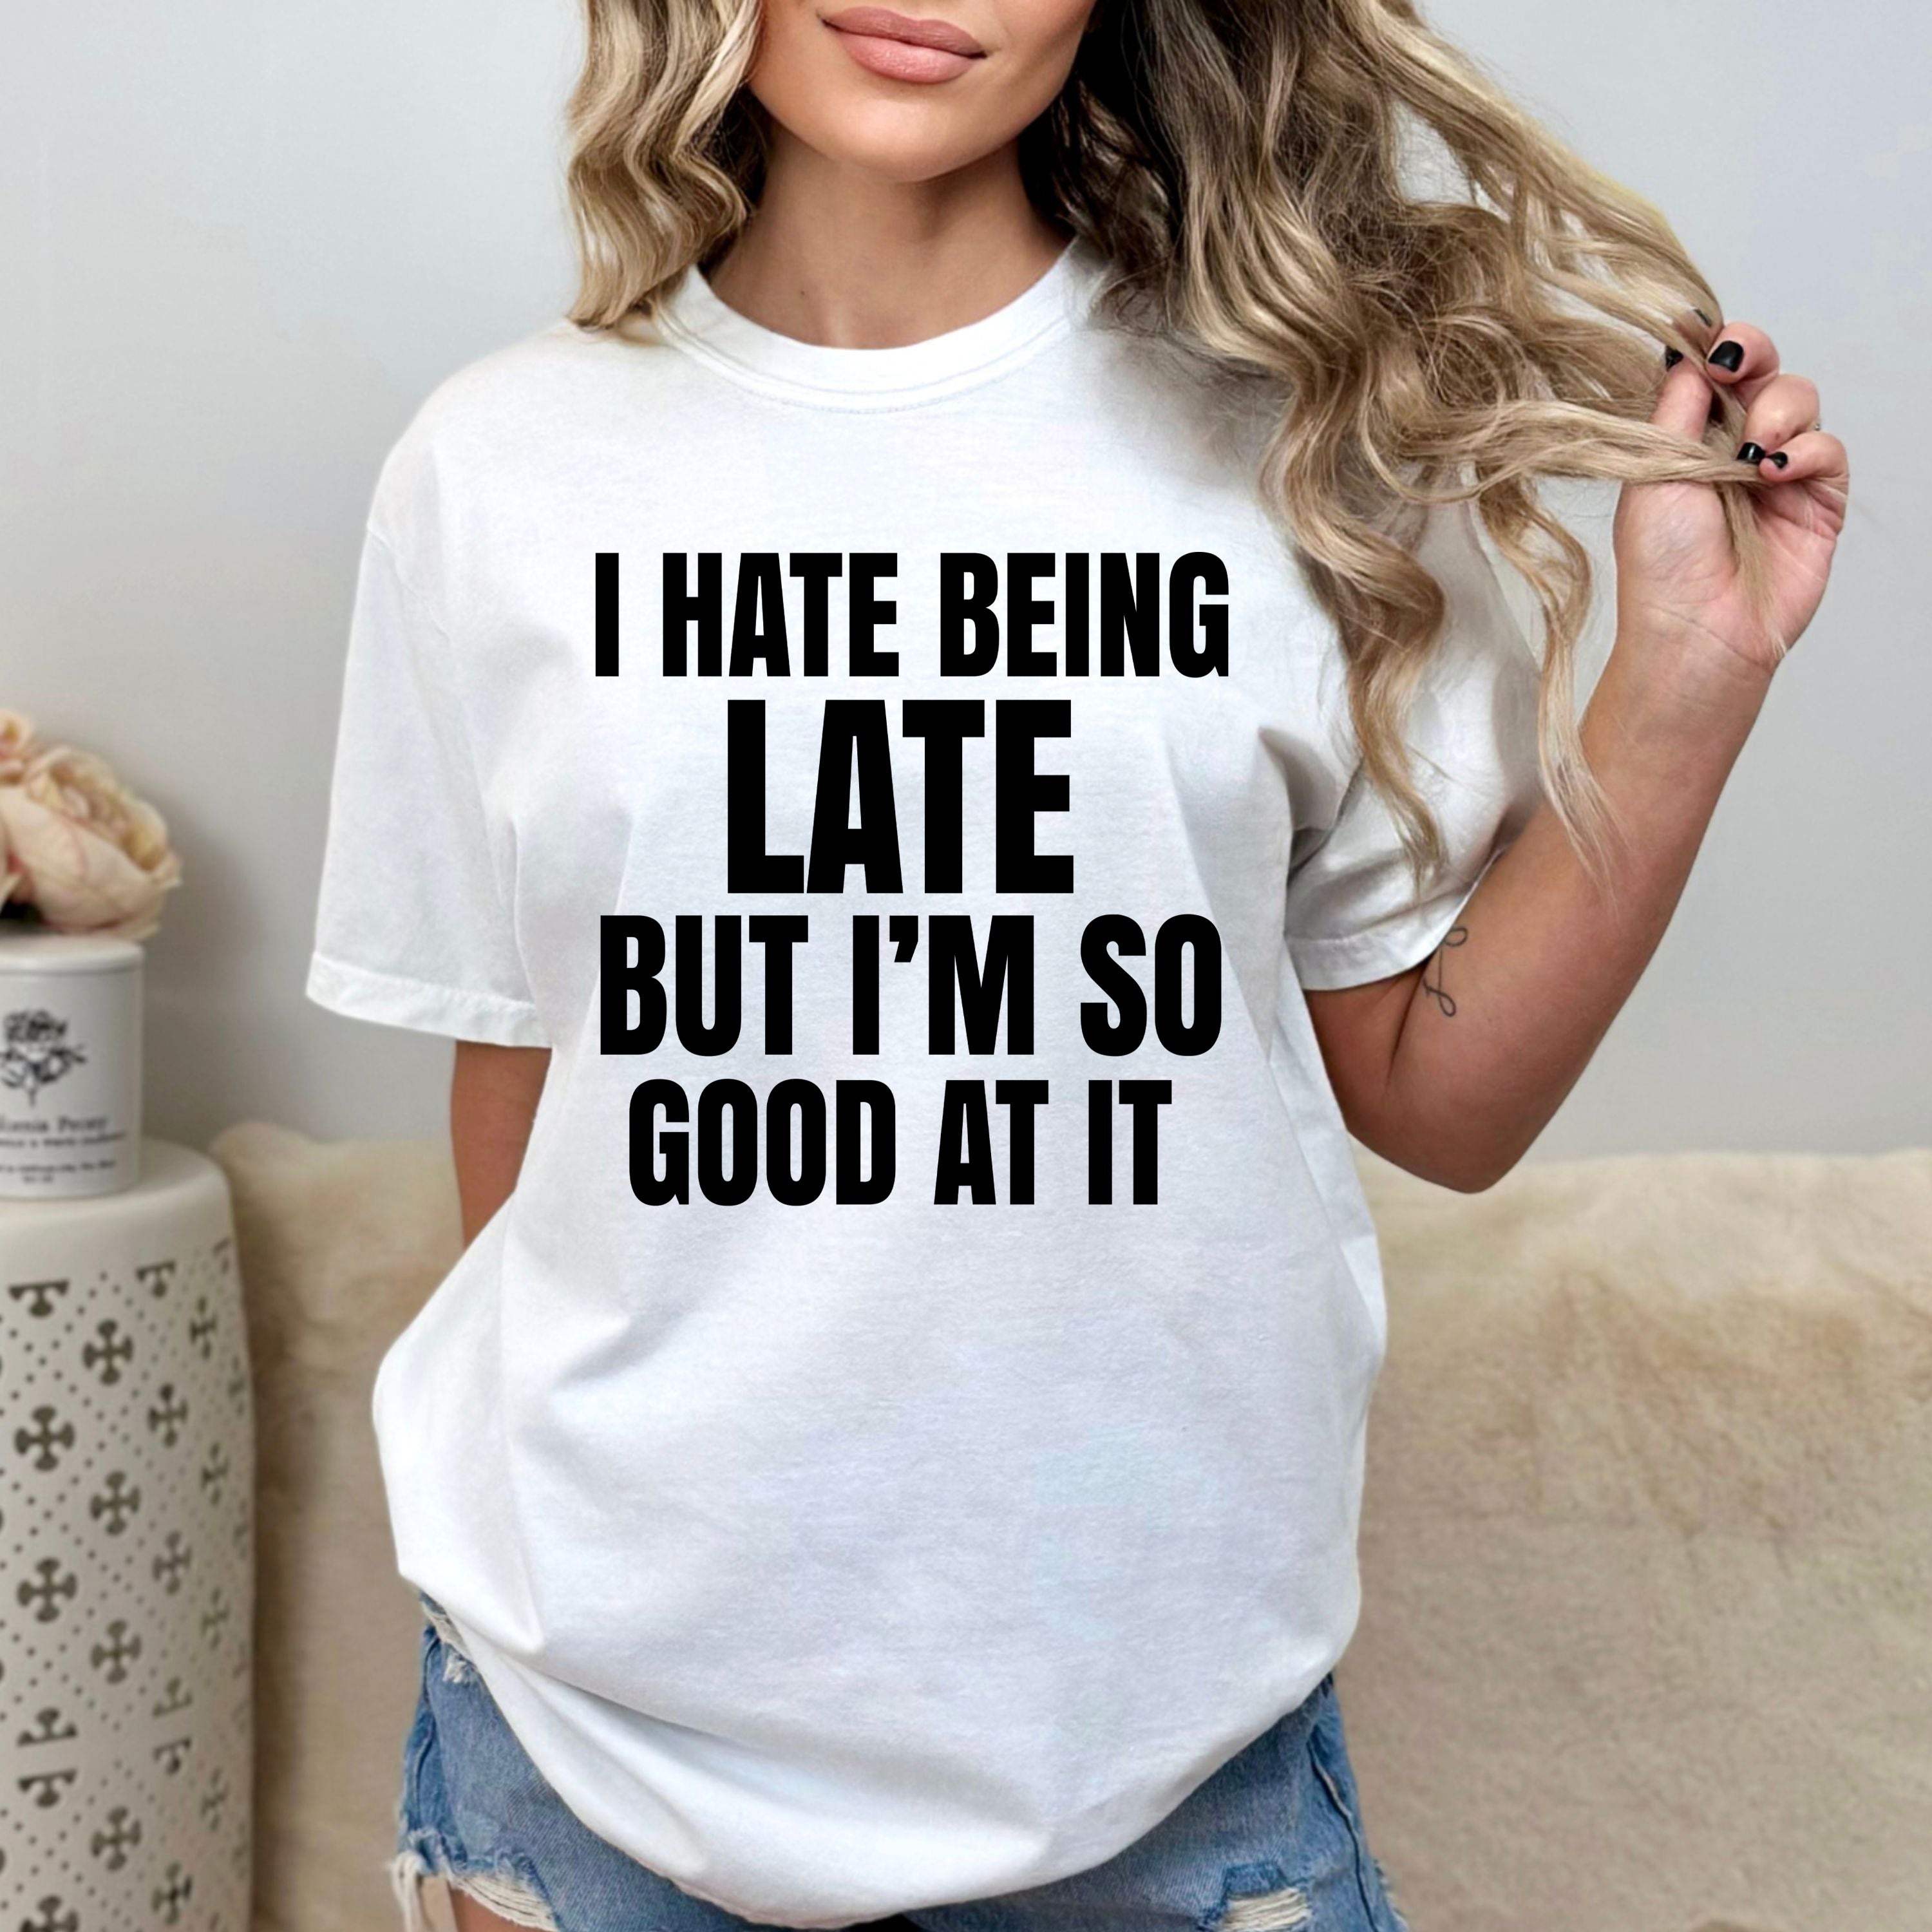 "I HATE BEING LATE"T-SHIRT